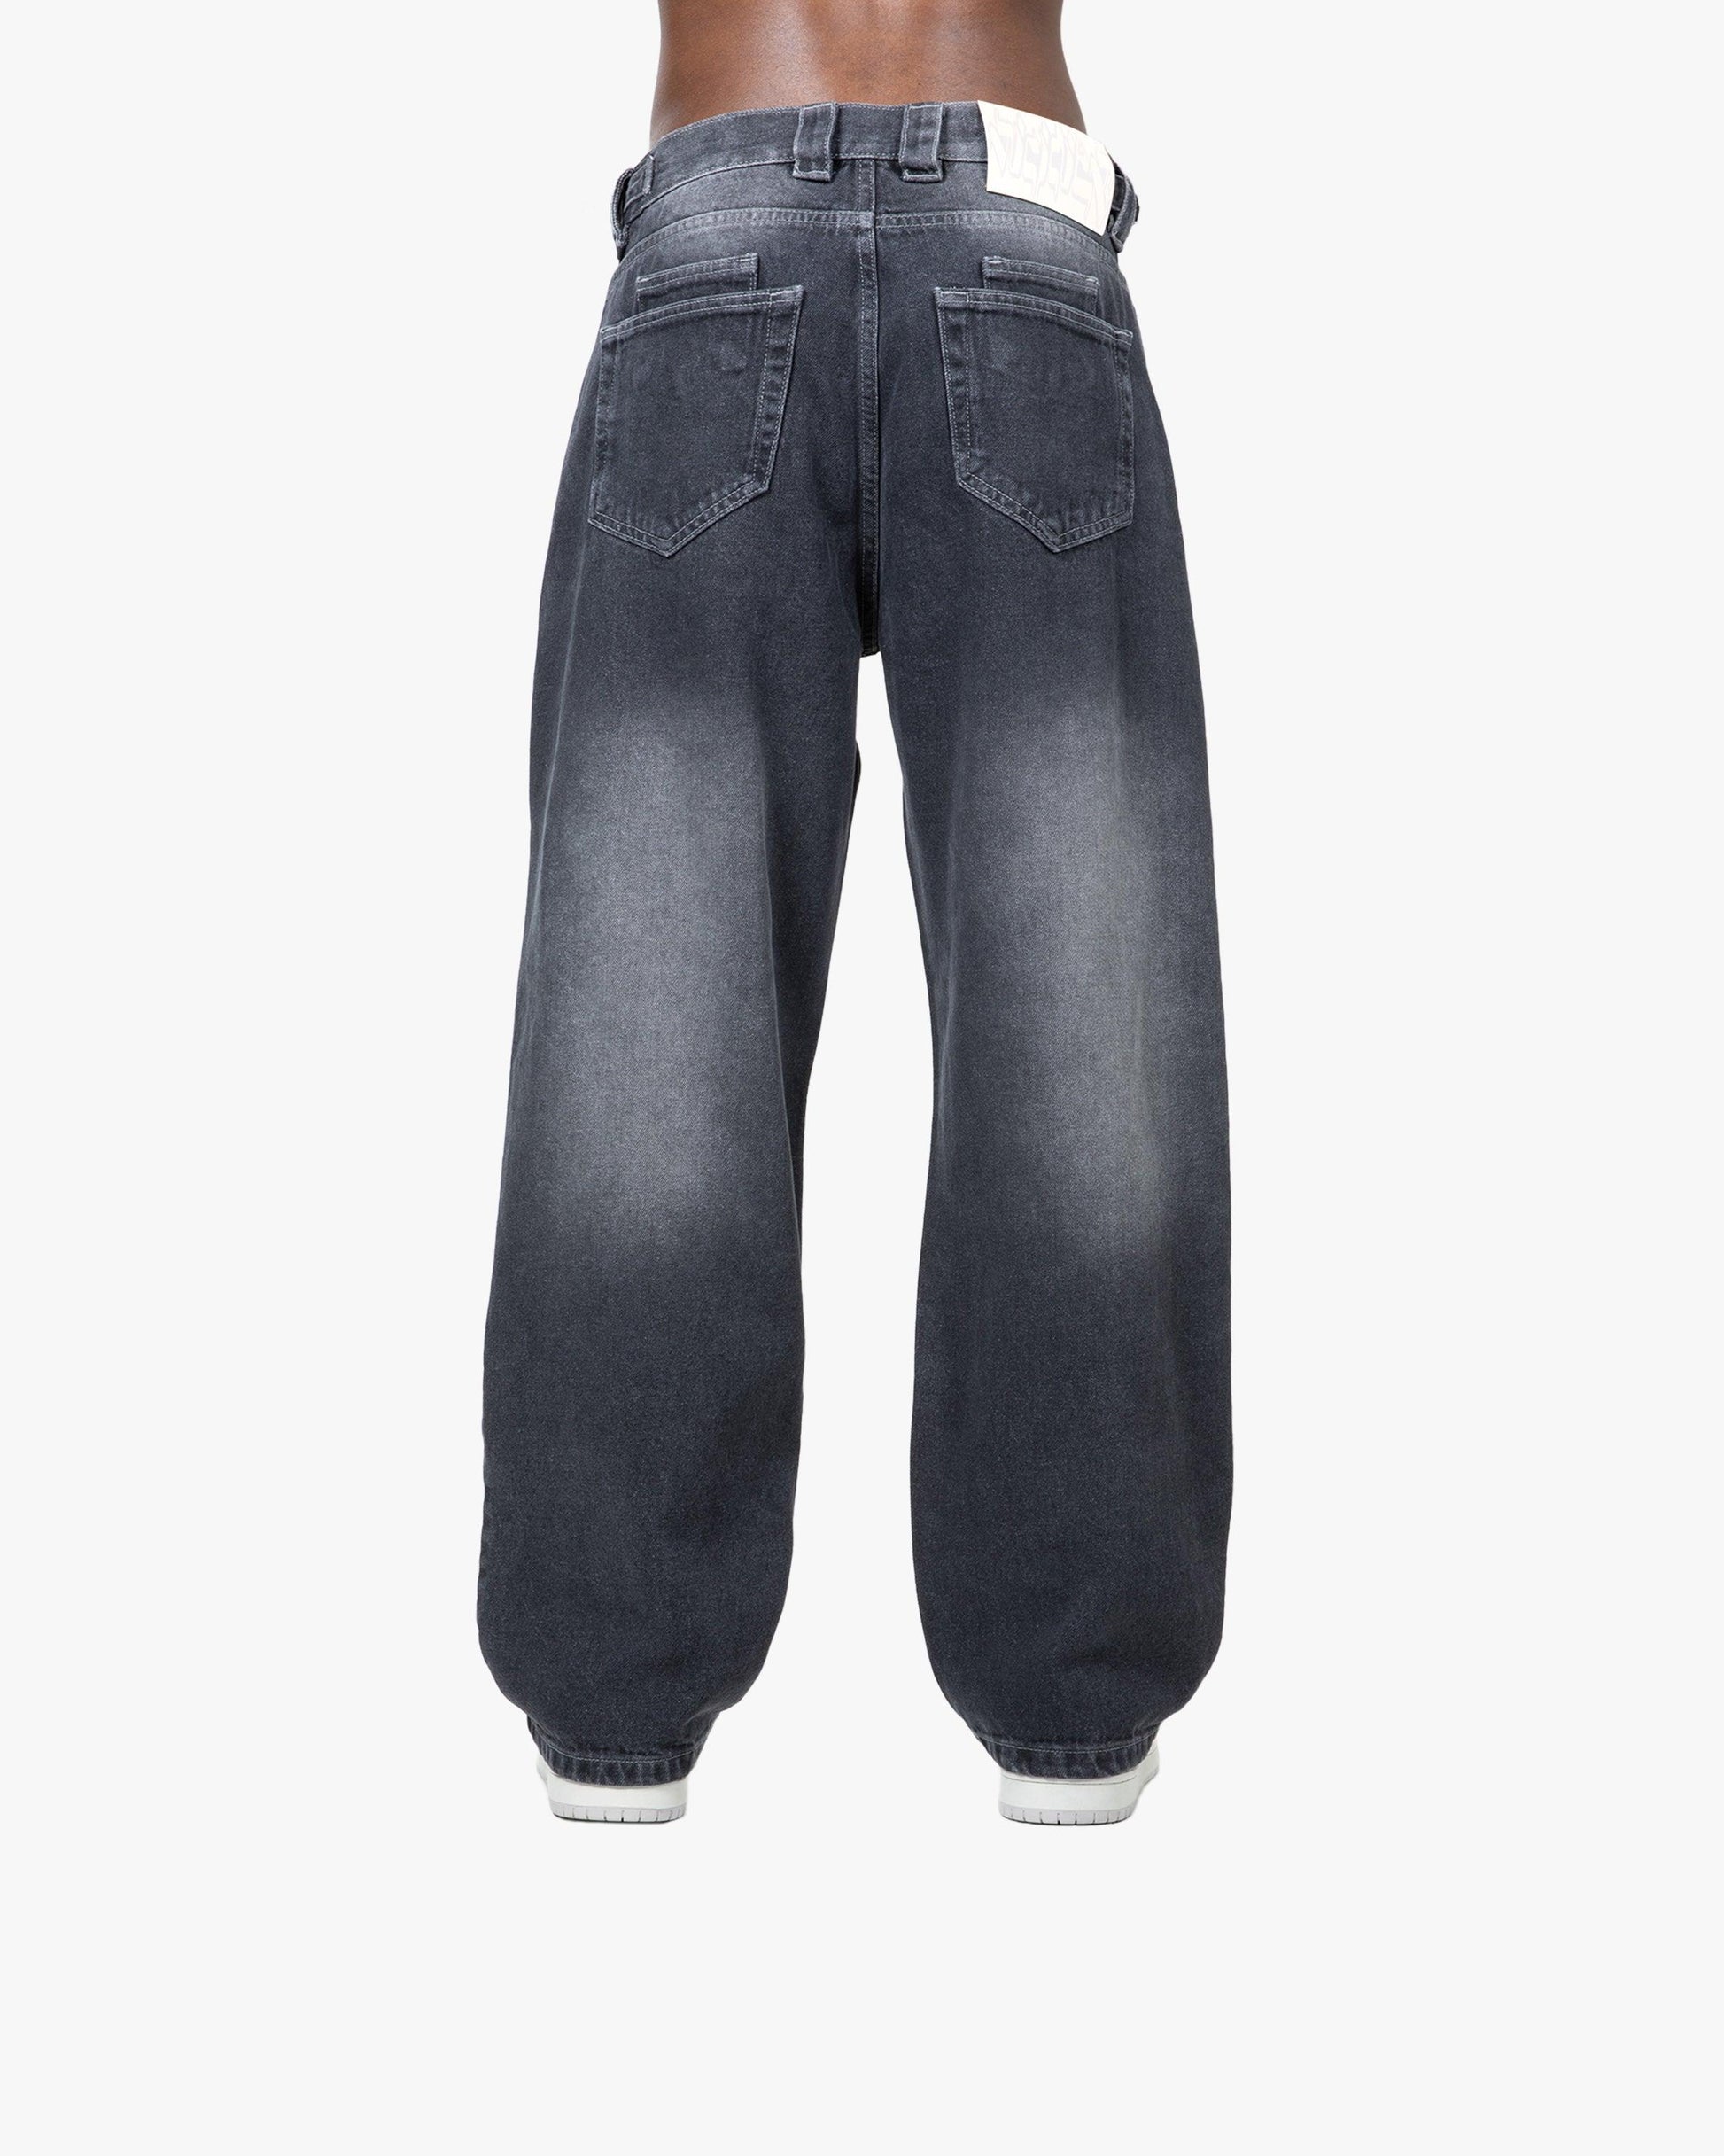 OUTLINED MIRAGE DENIM GREY / WHITE - VICINITY